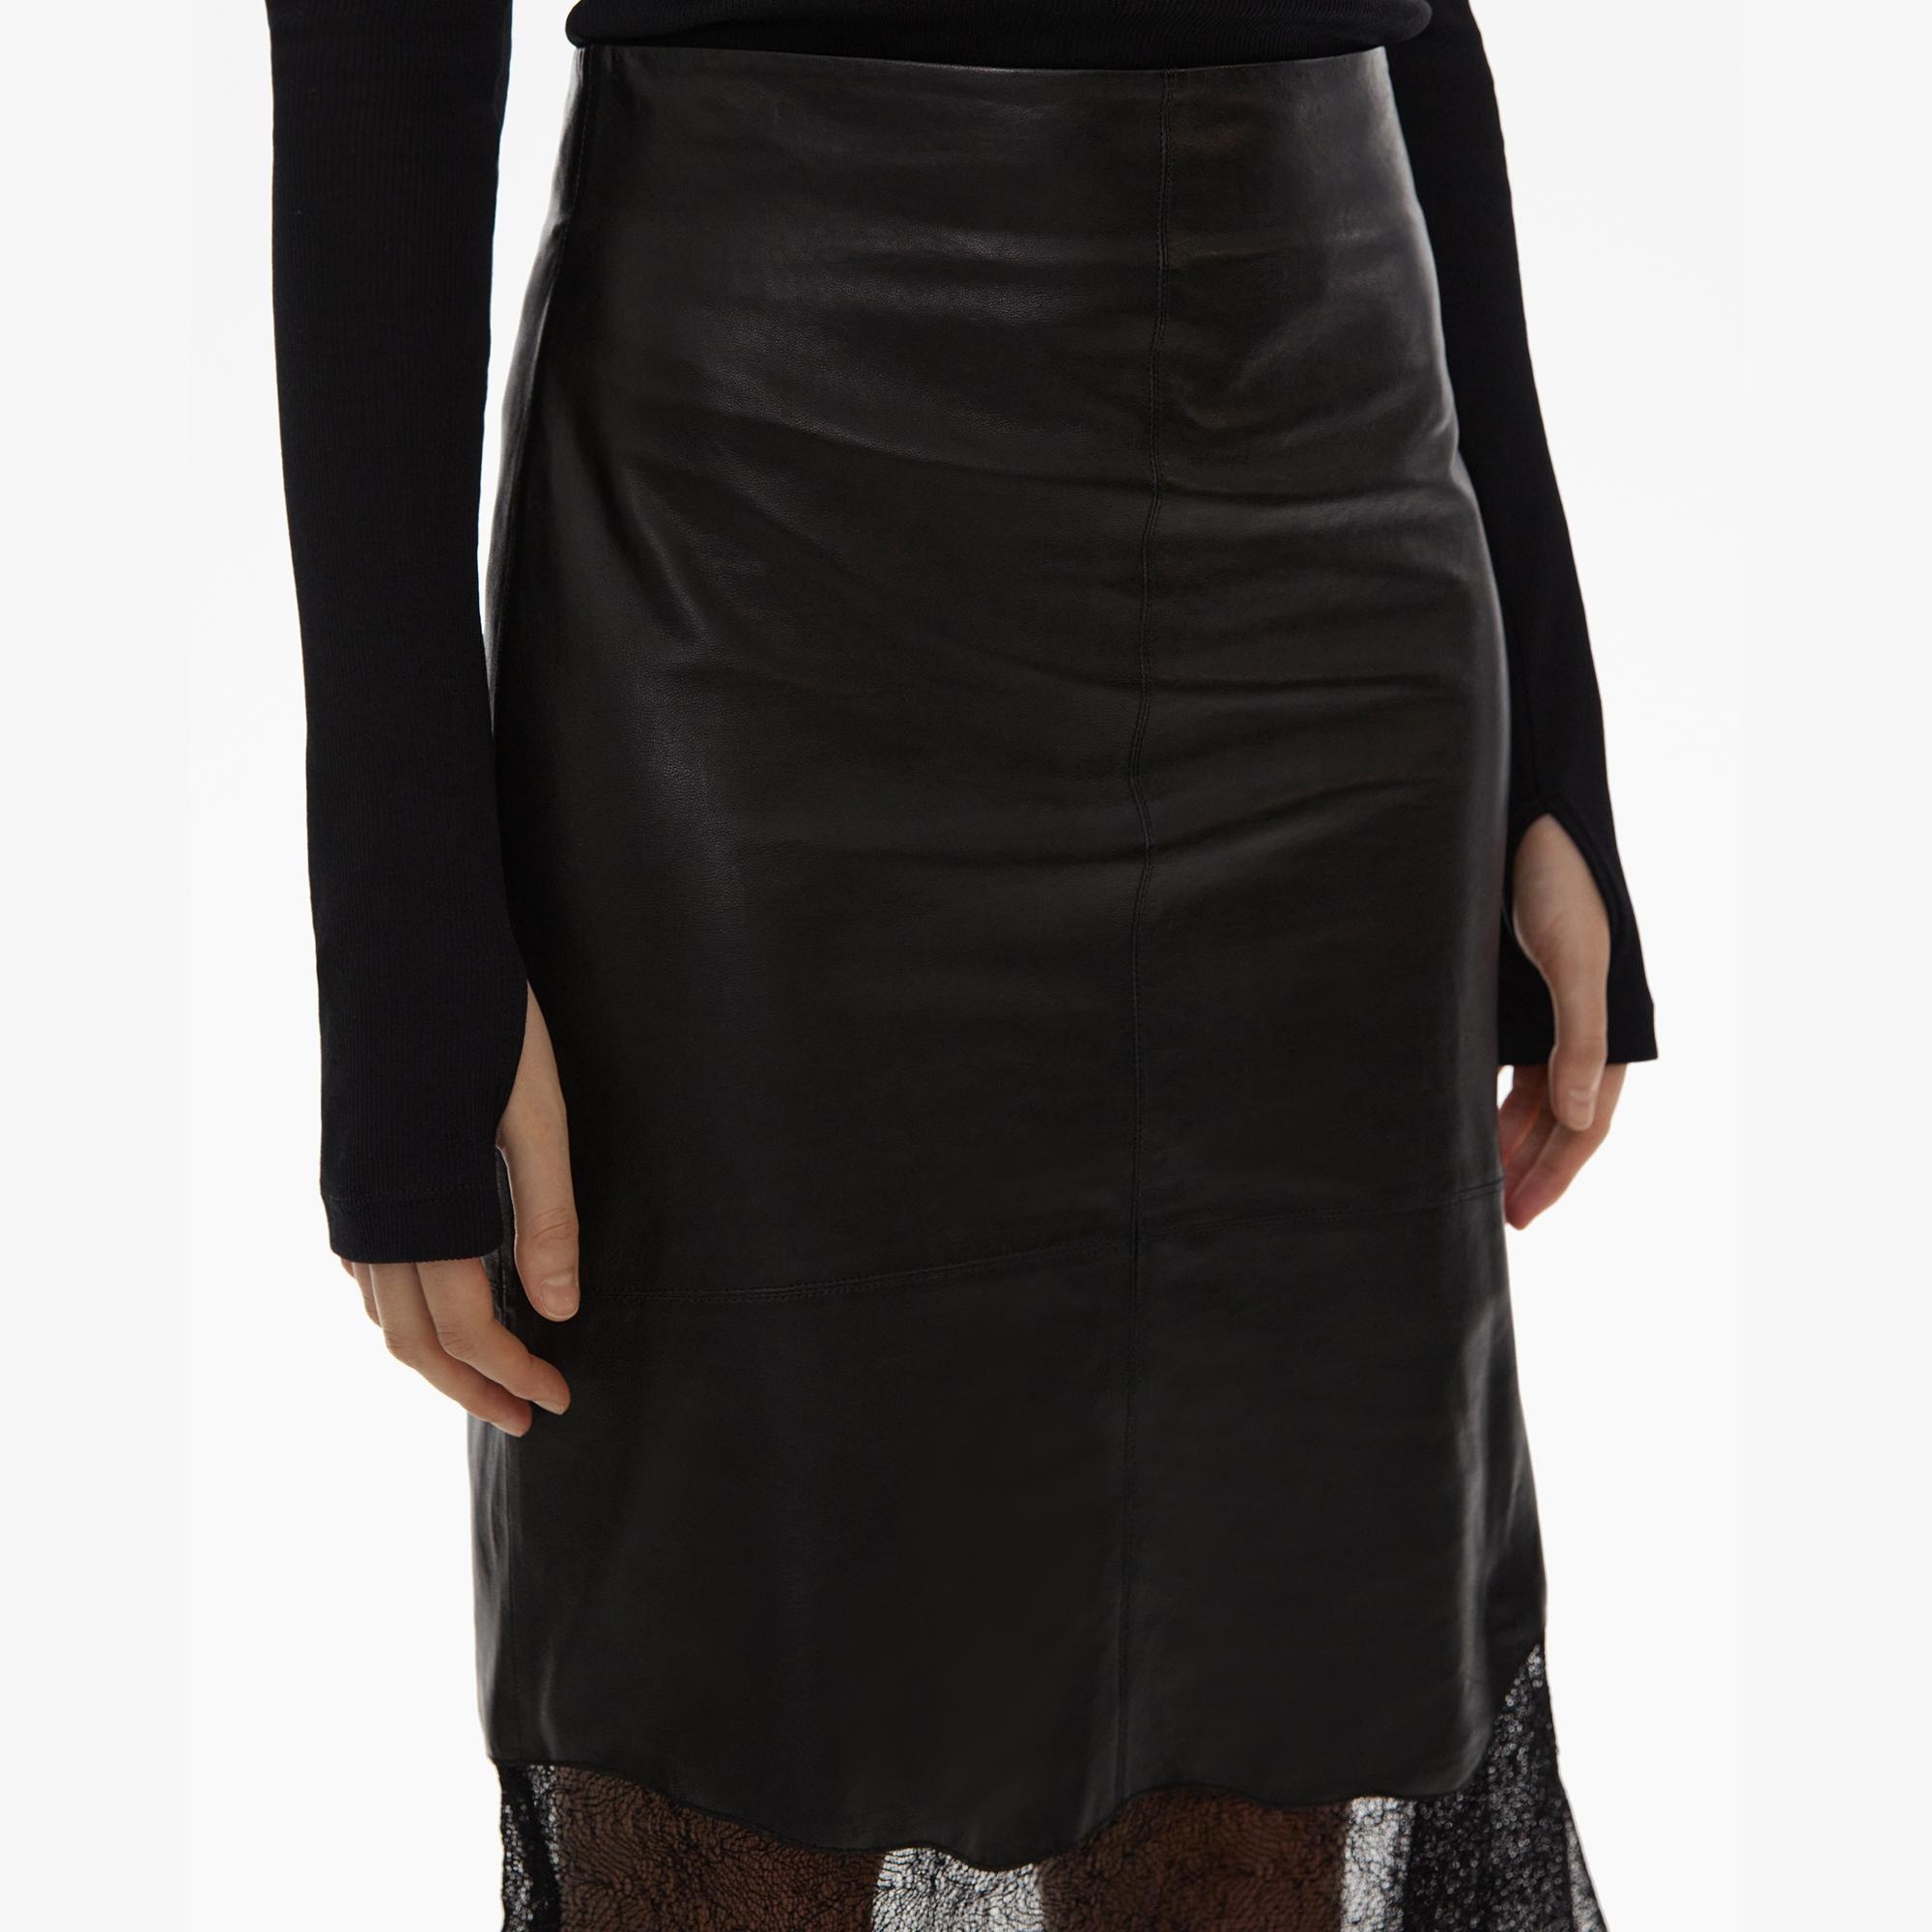 LACE-TRIMMED LEATHER SKIRT - 5